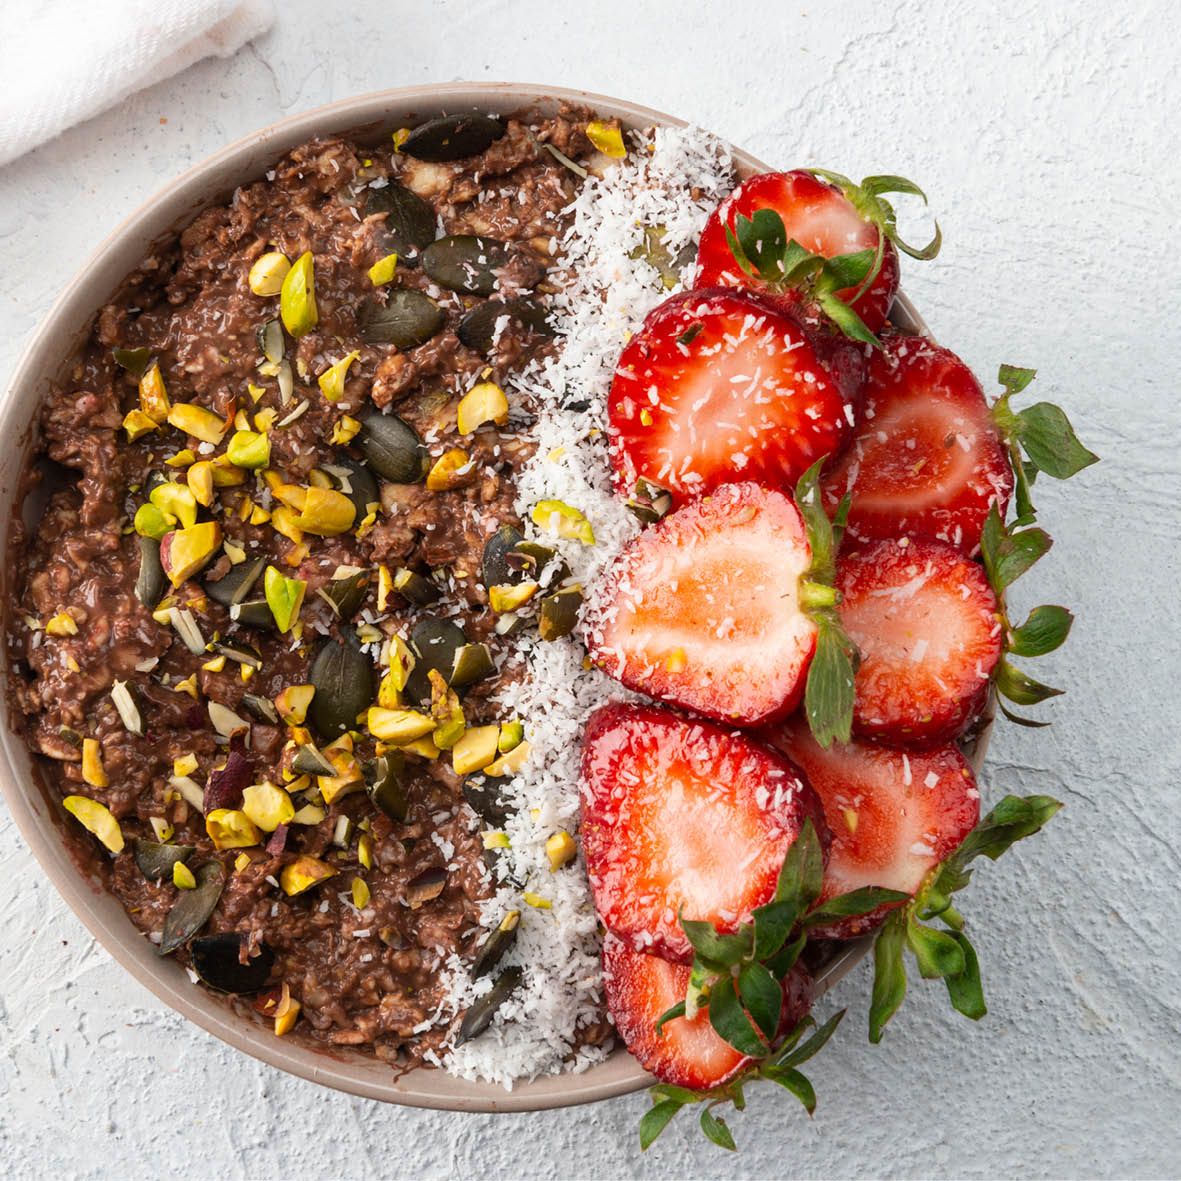 Choc Coconut smoothie bowl with Strawberries and Pistachios.jpg